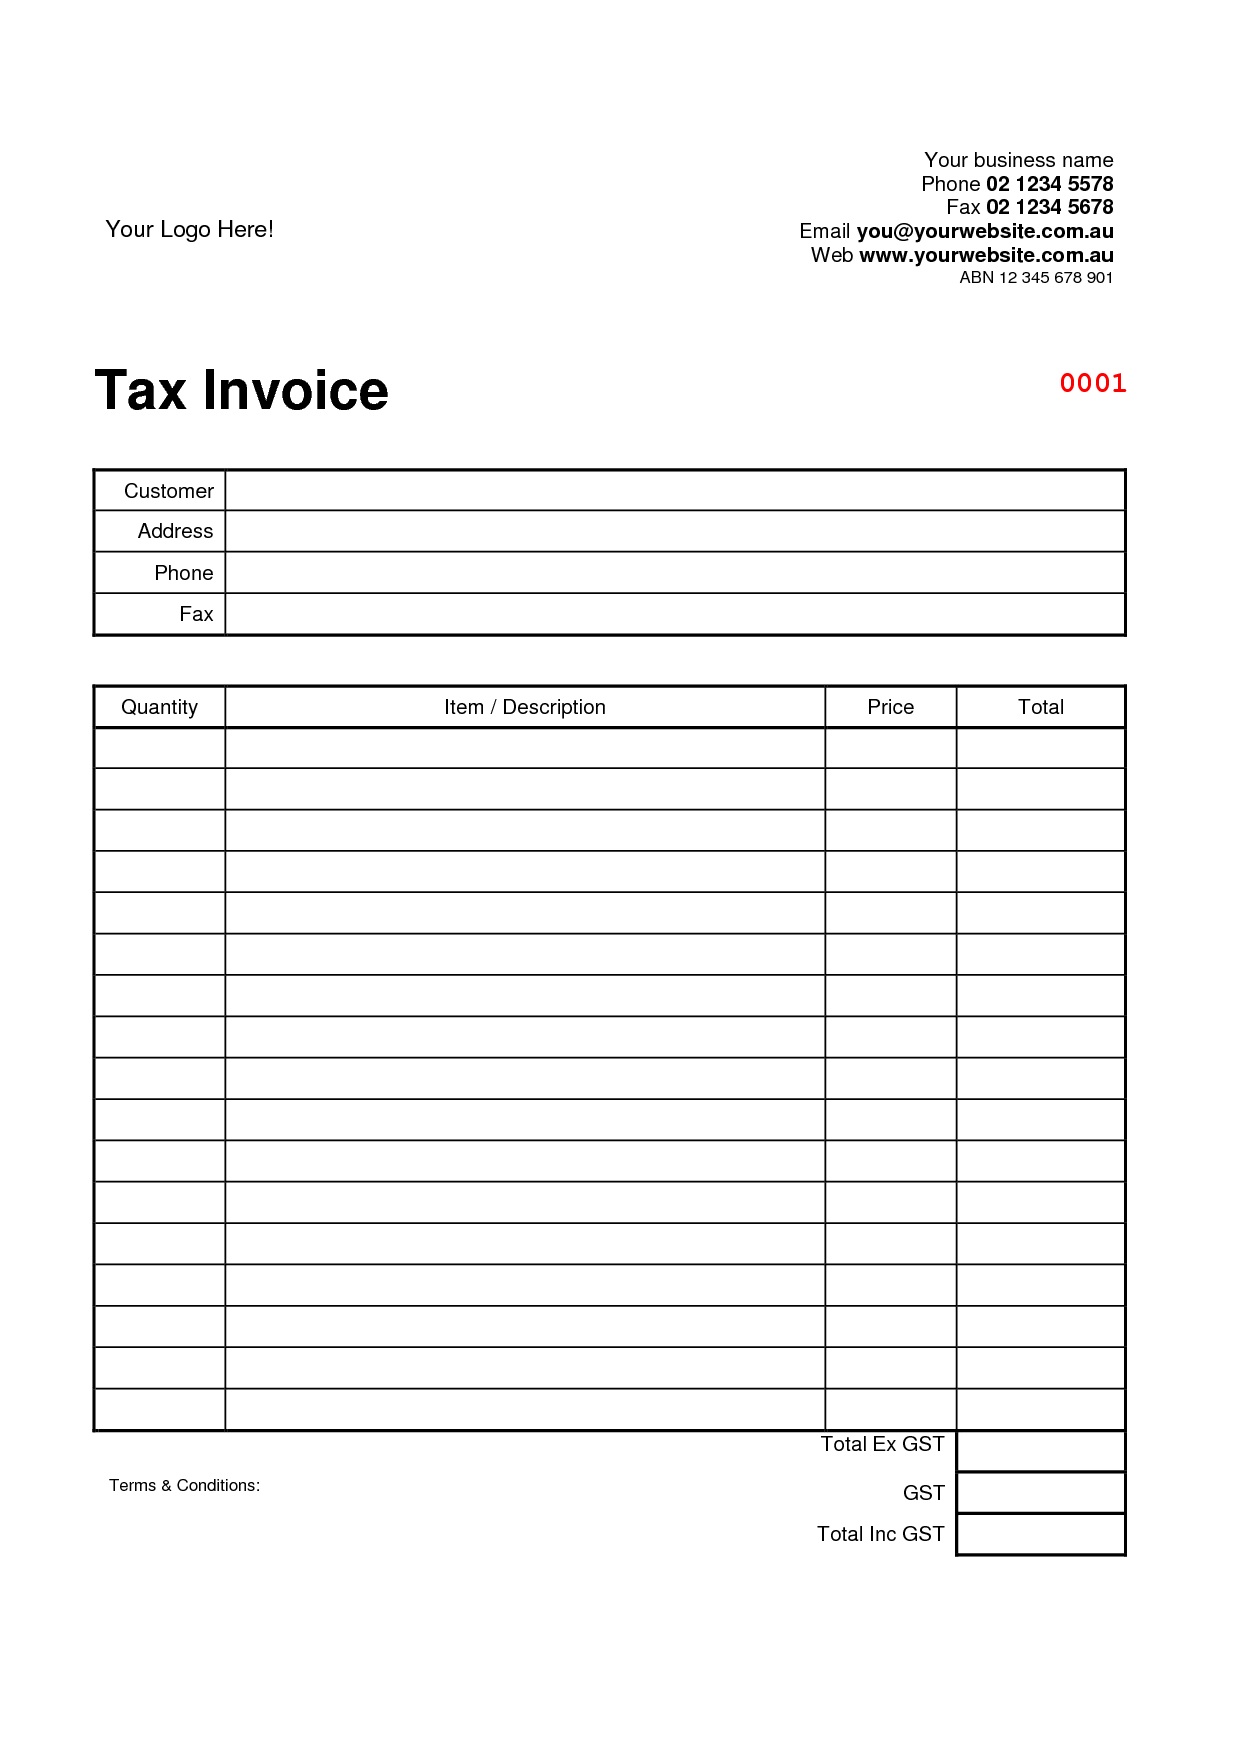 11 The Best Tax Invoice Template Australia Word In Photoshop With Tax Invoice Template Australia Word Cards Design Templates